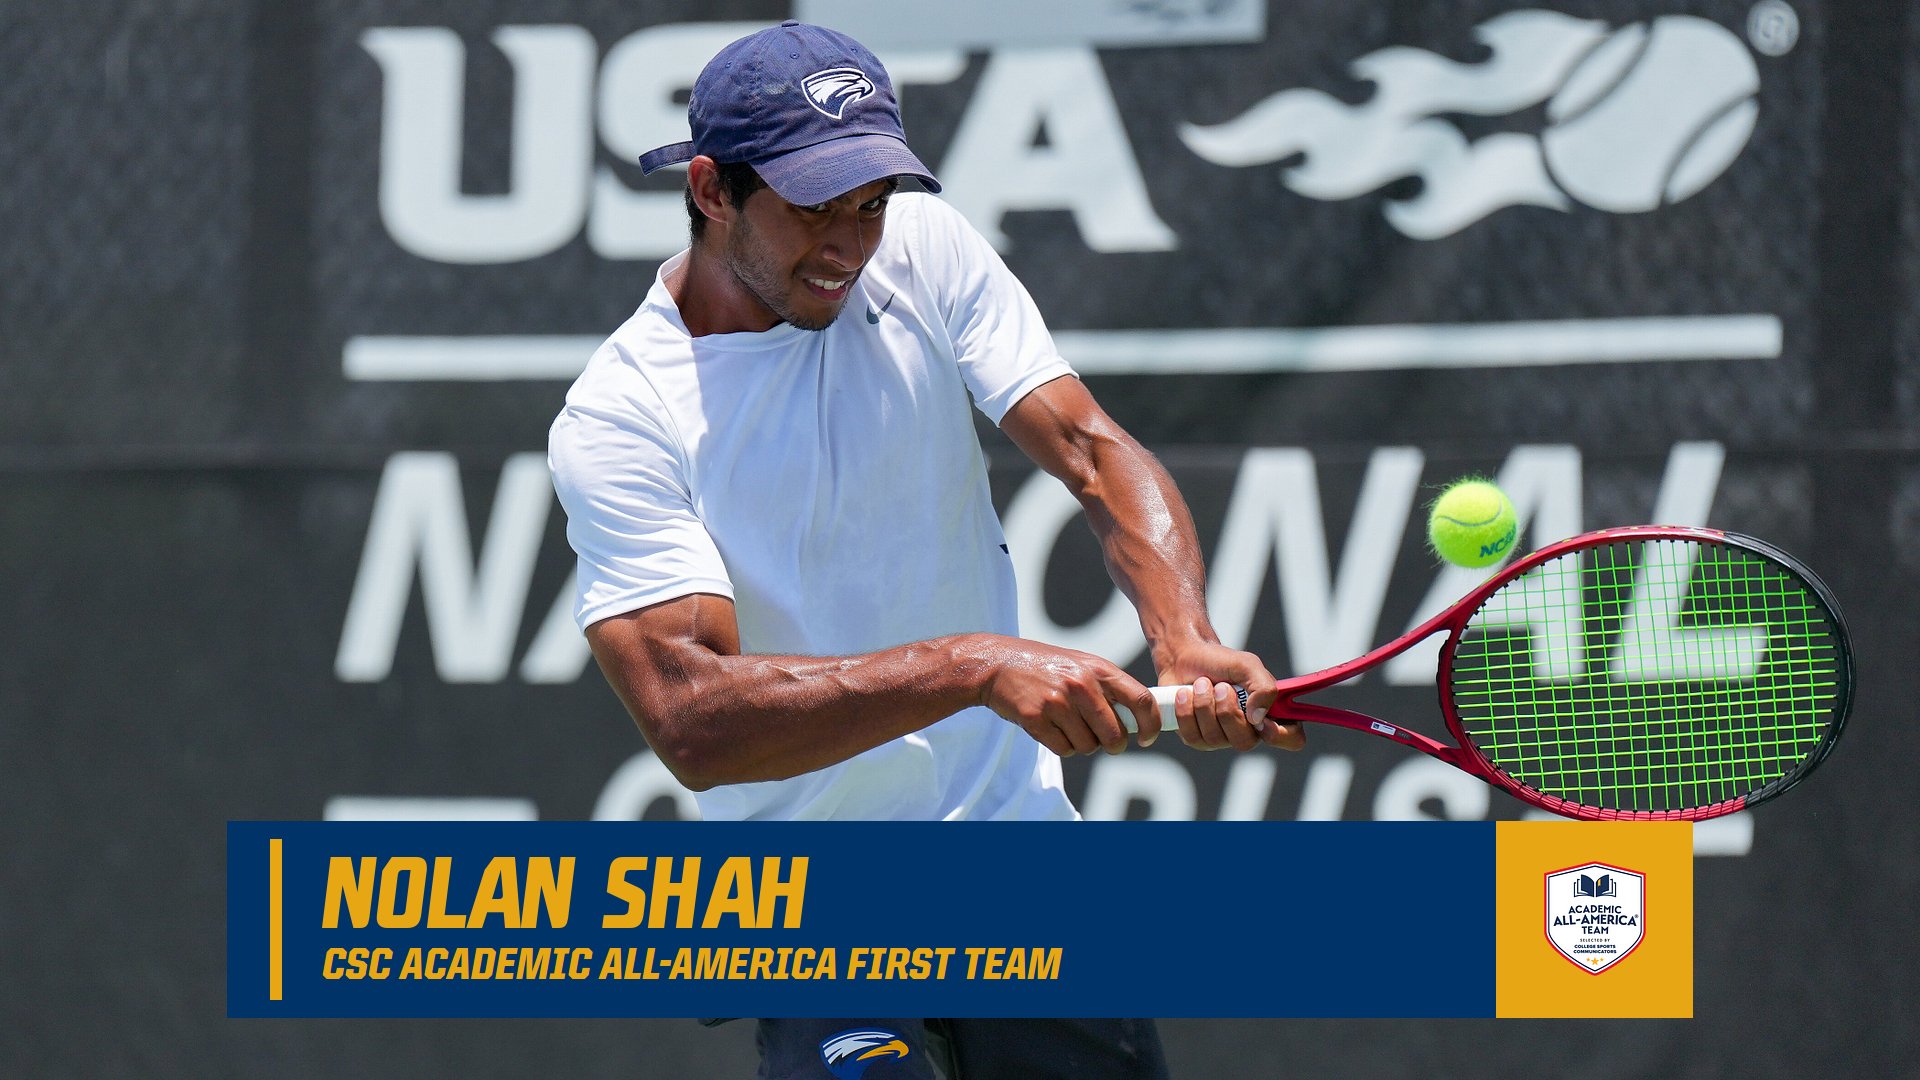 Nolan Shah Named to CSC Academic All-America First Team